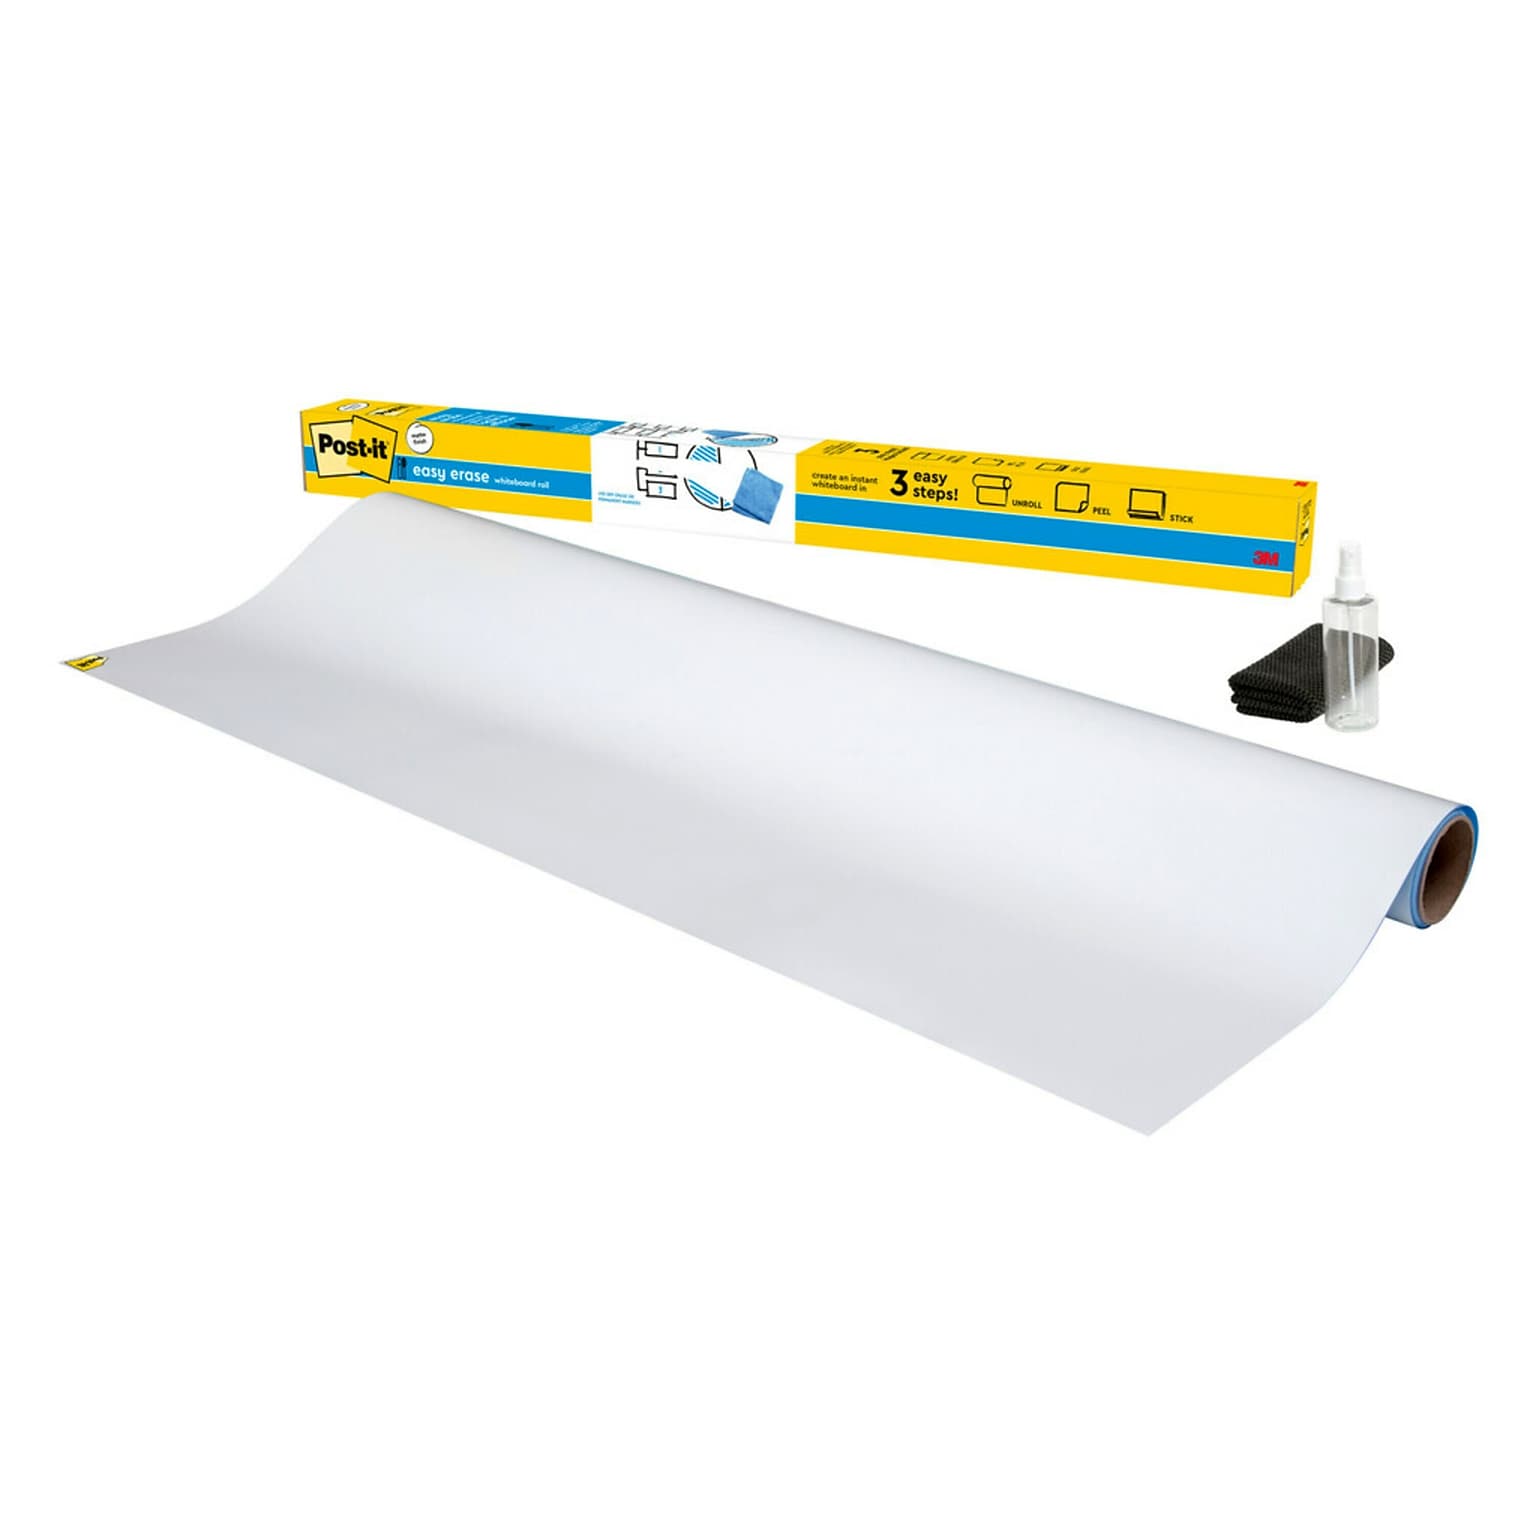 Post-it Flex Write Surface, 6 ft x 4 ft, Permanent Marker Wipes Away with Water, Permanent Marker Whiteboard Surface